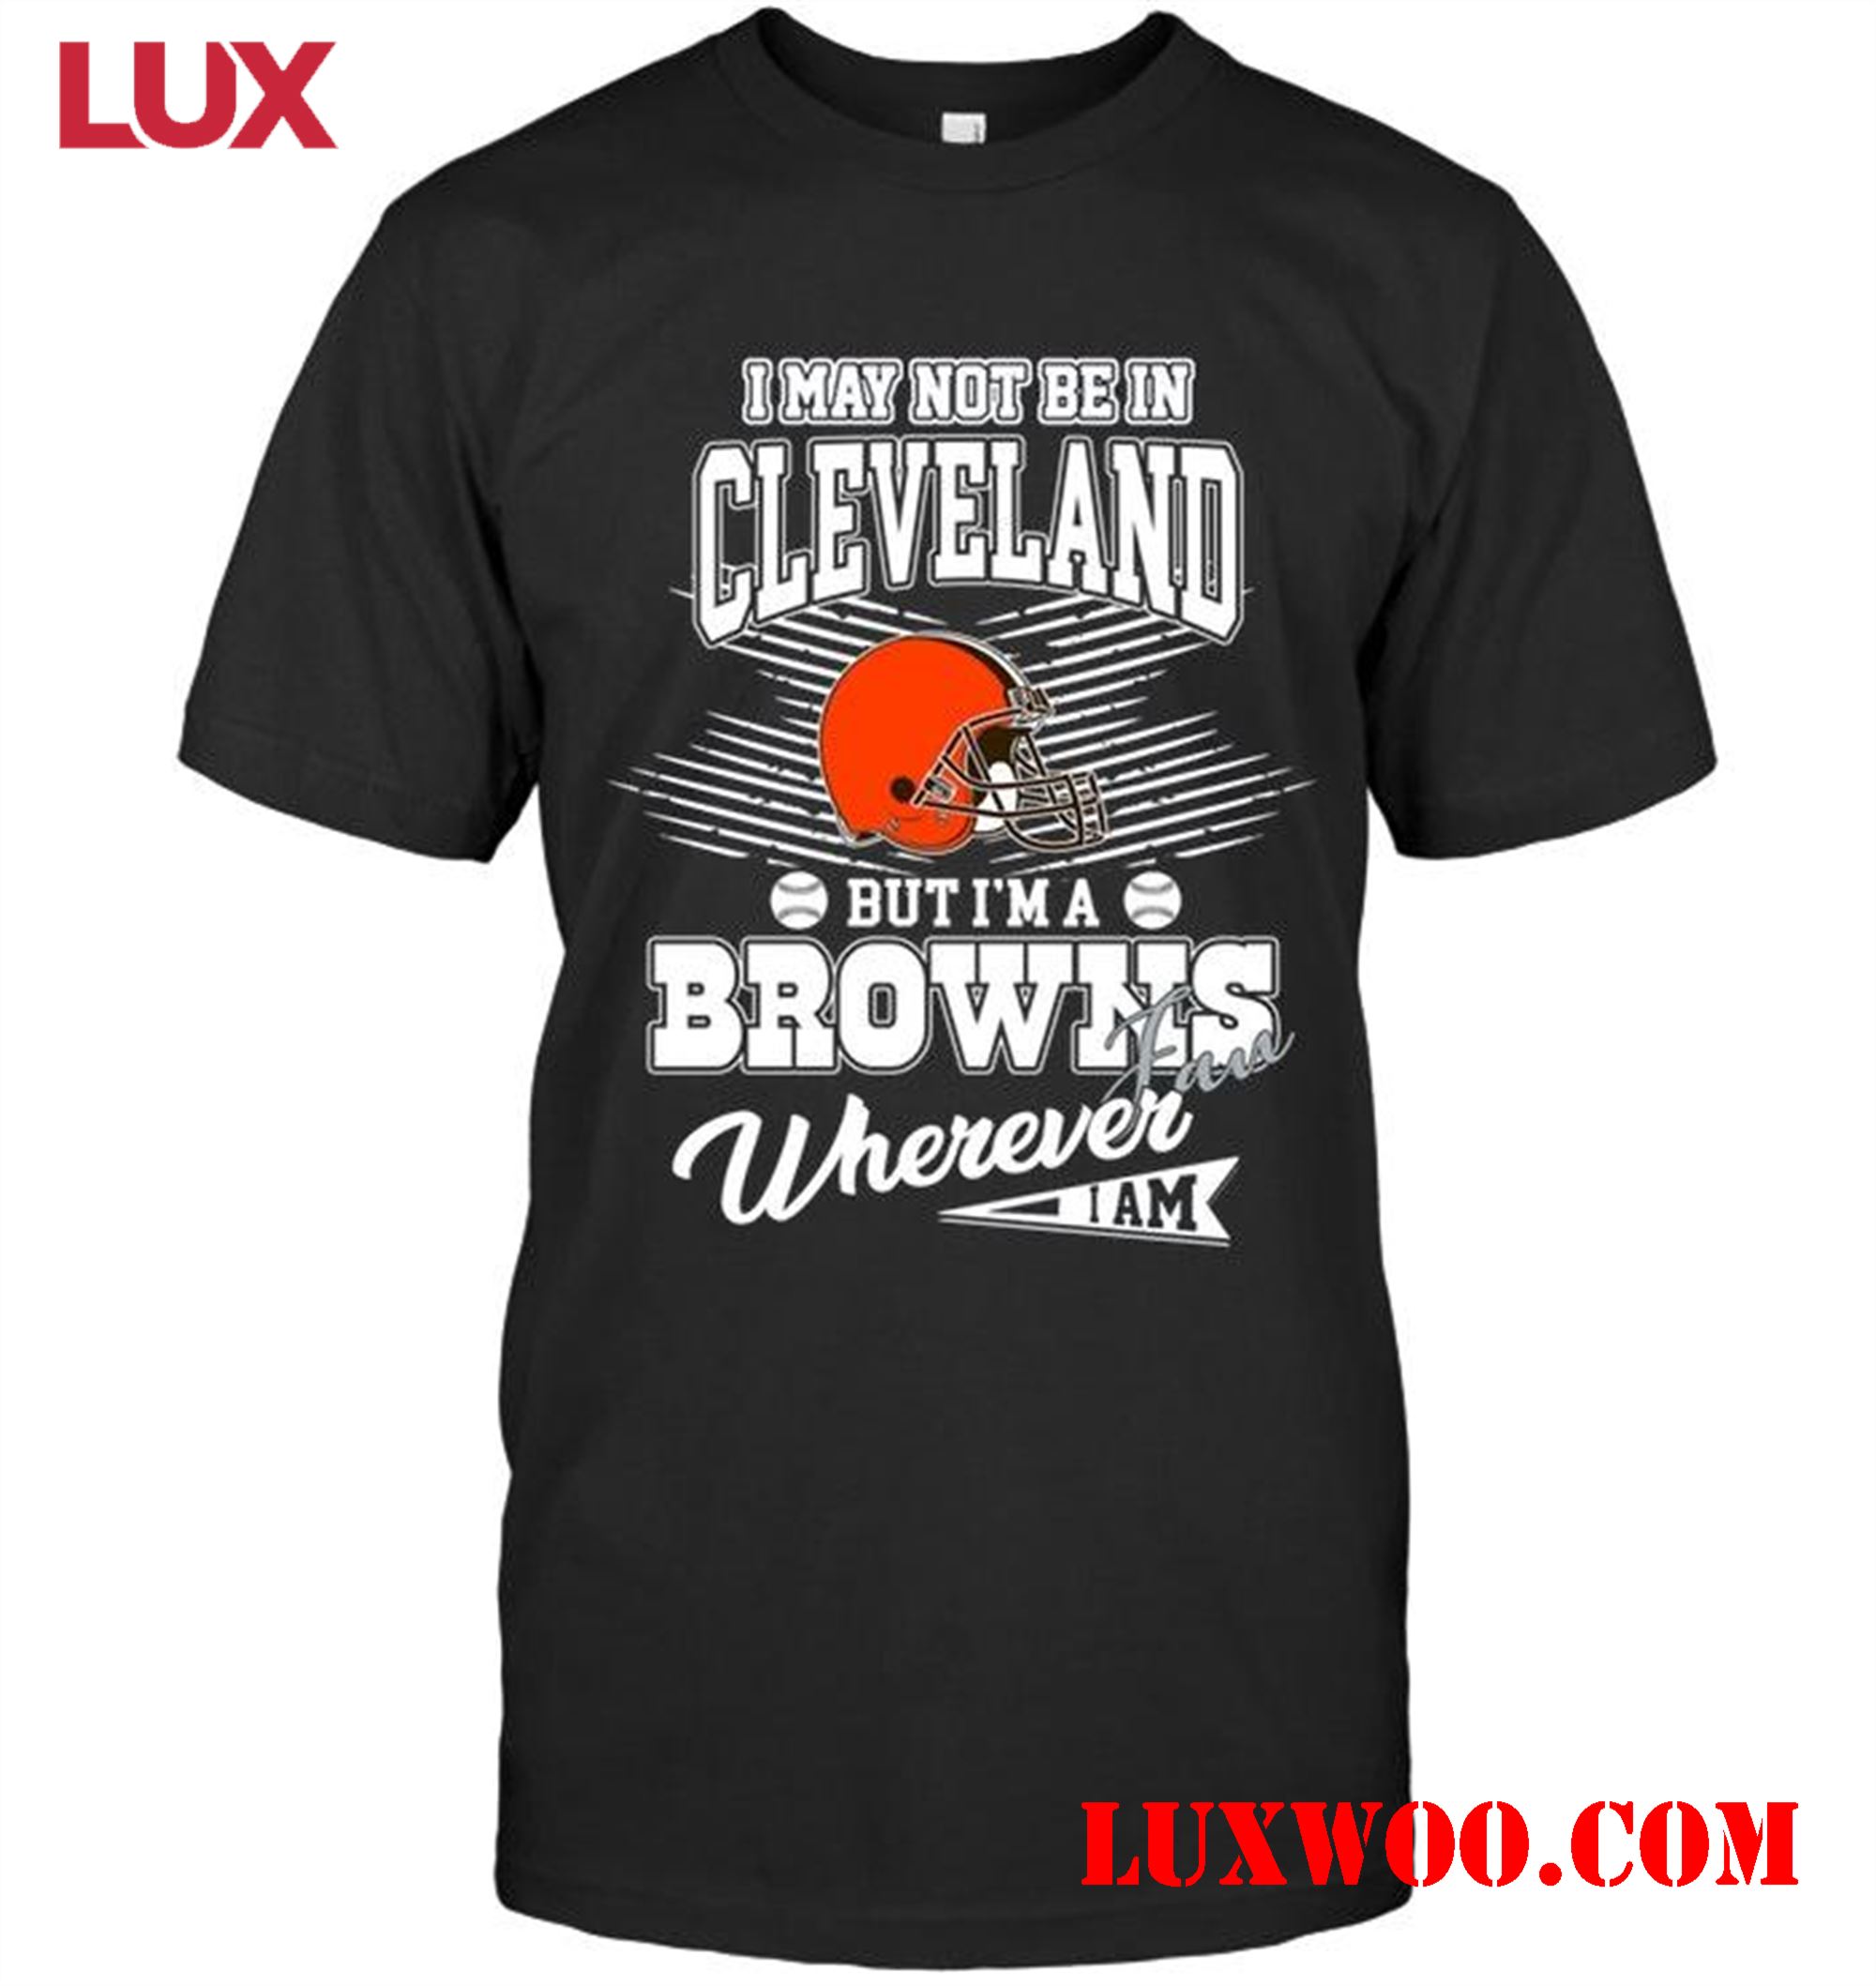 Nfl Cleveland Browns I May Not Be In Cleveland But Im A Cleveland Browns Fan Whereever I Am Shirt 